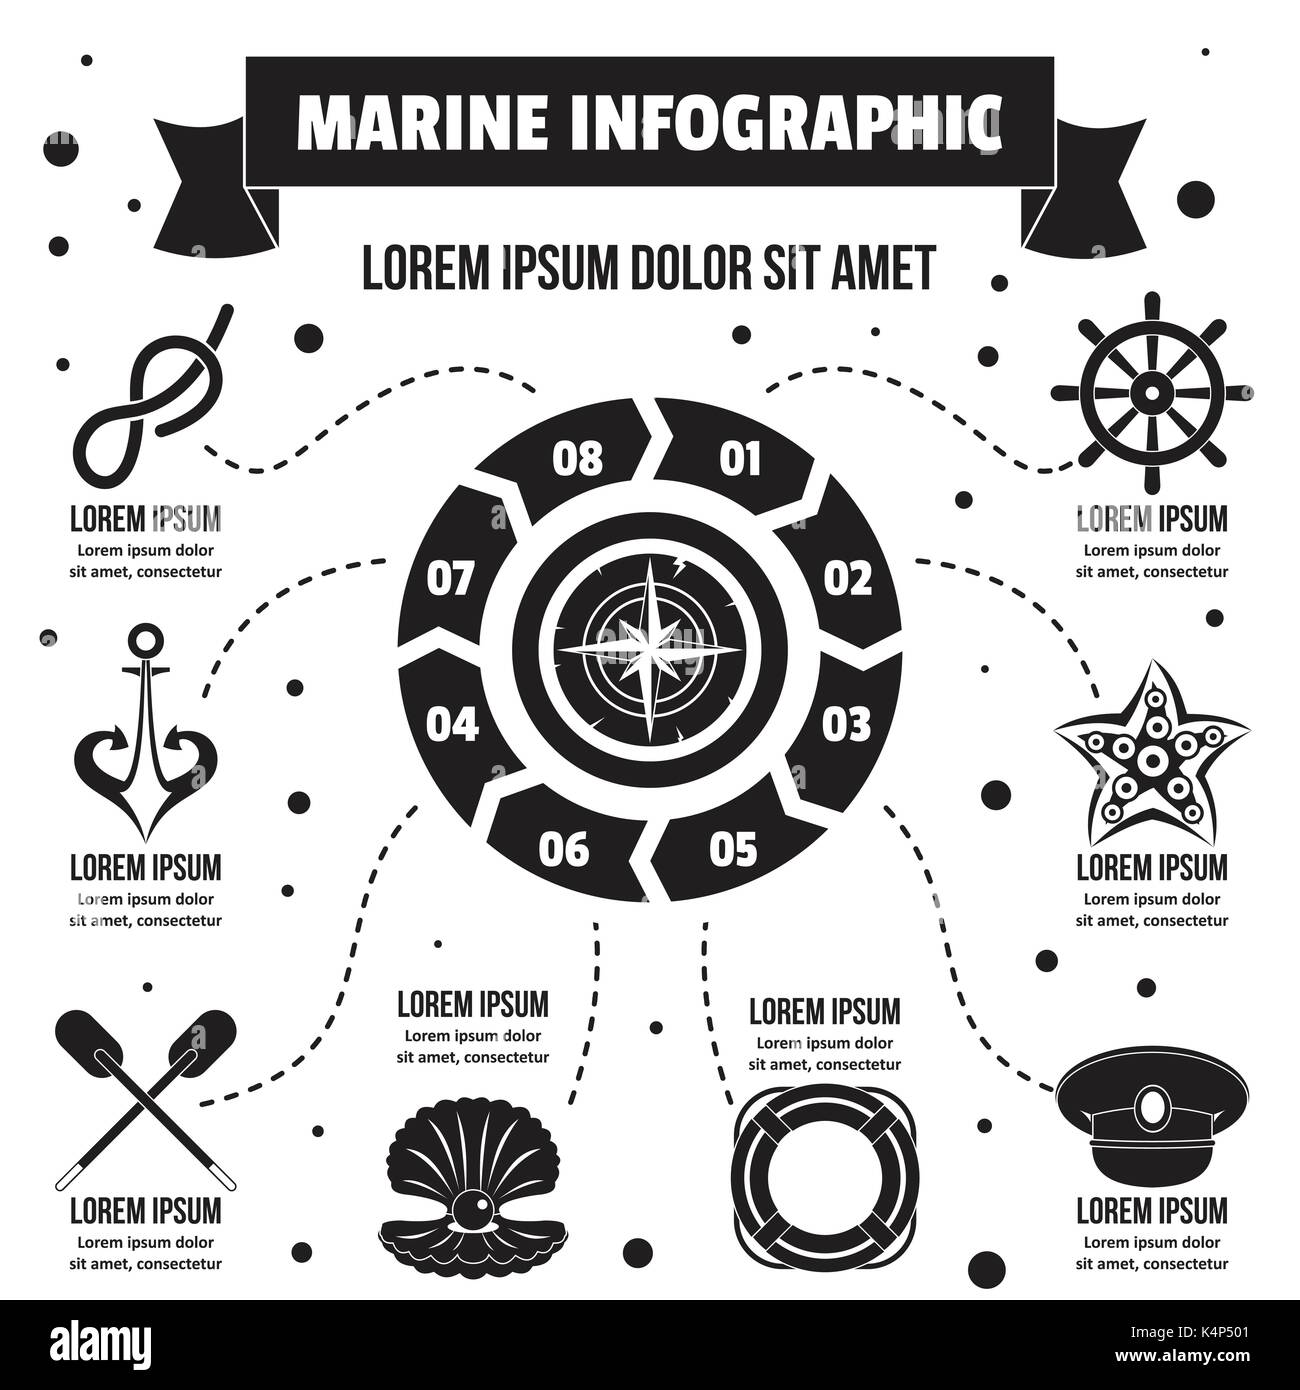 Marine infographic concept, simple style Stock Vector